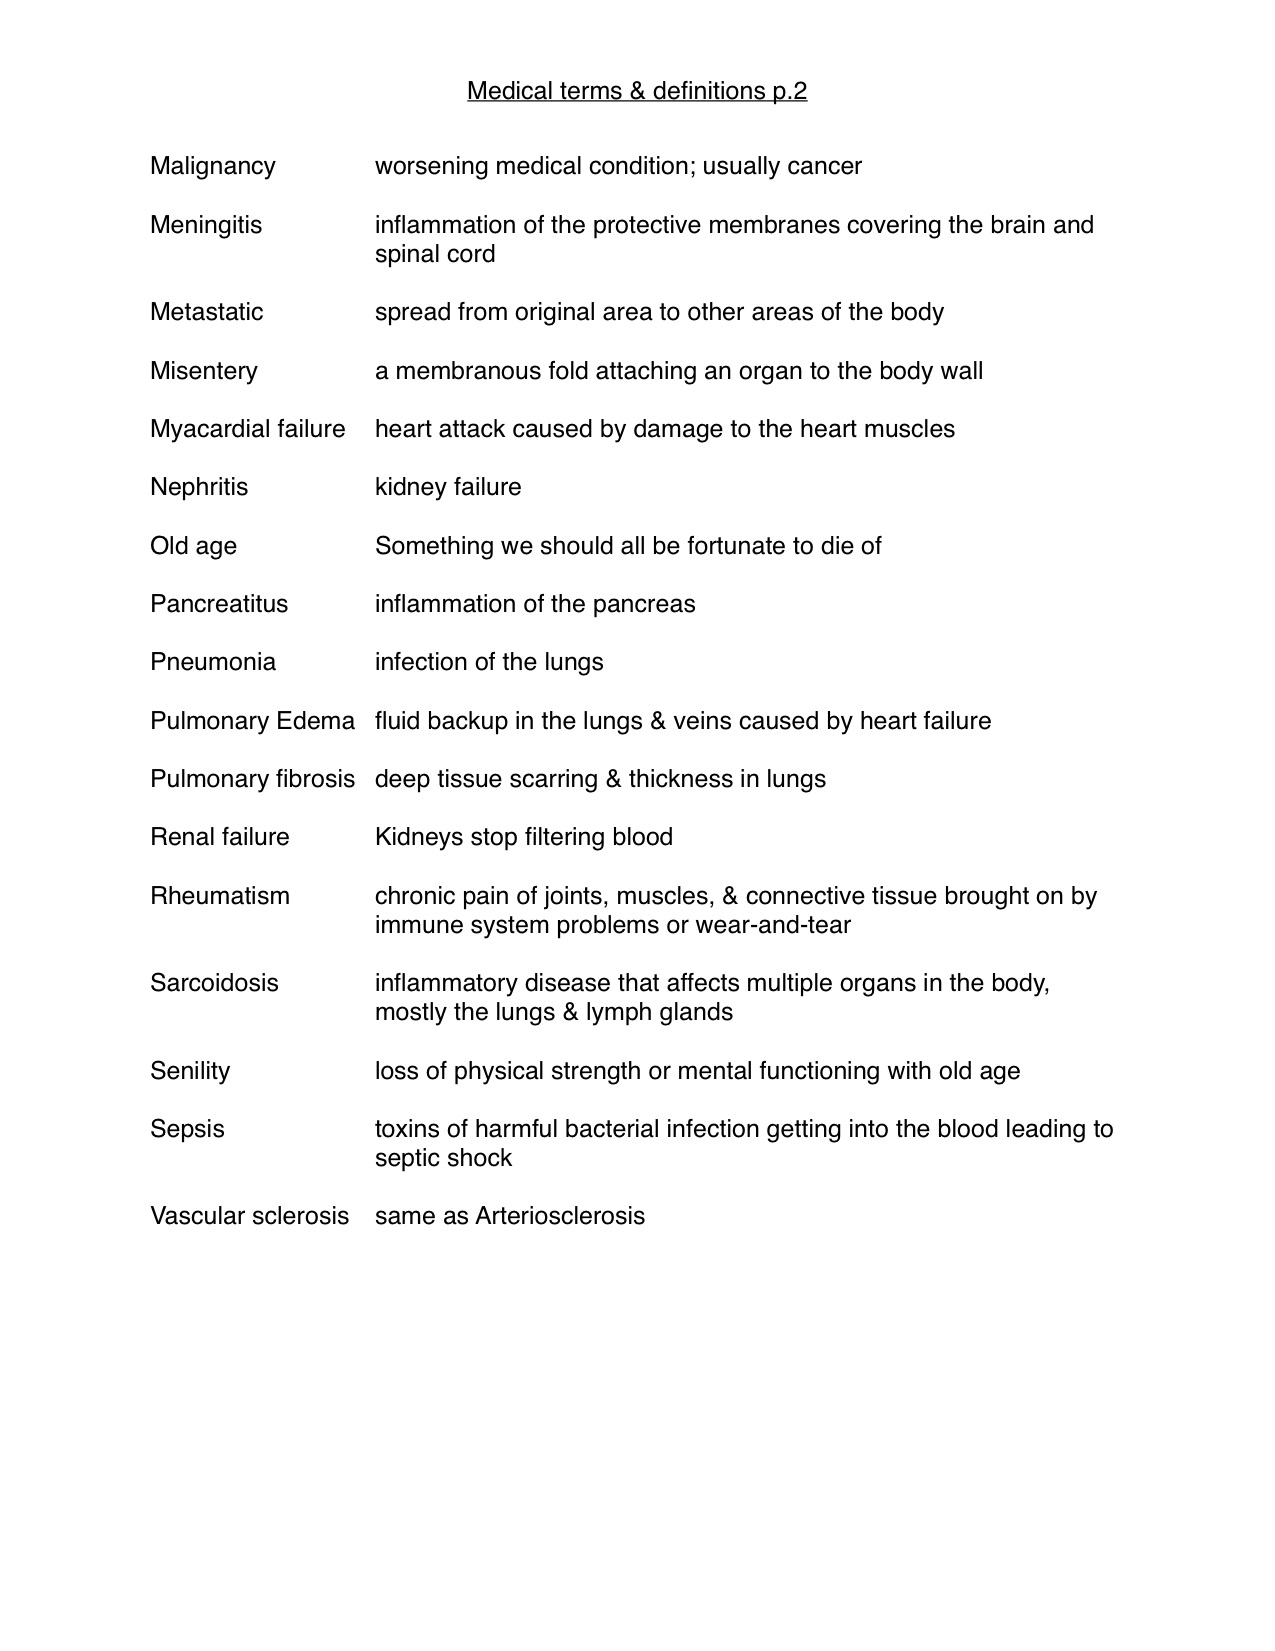 Preview of “Medical terms” p2